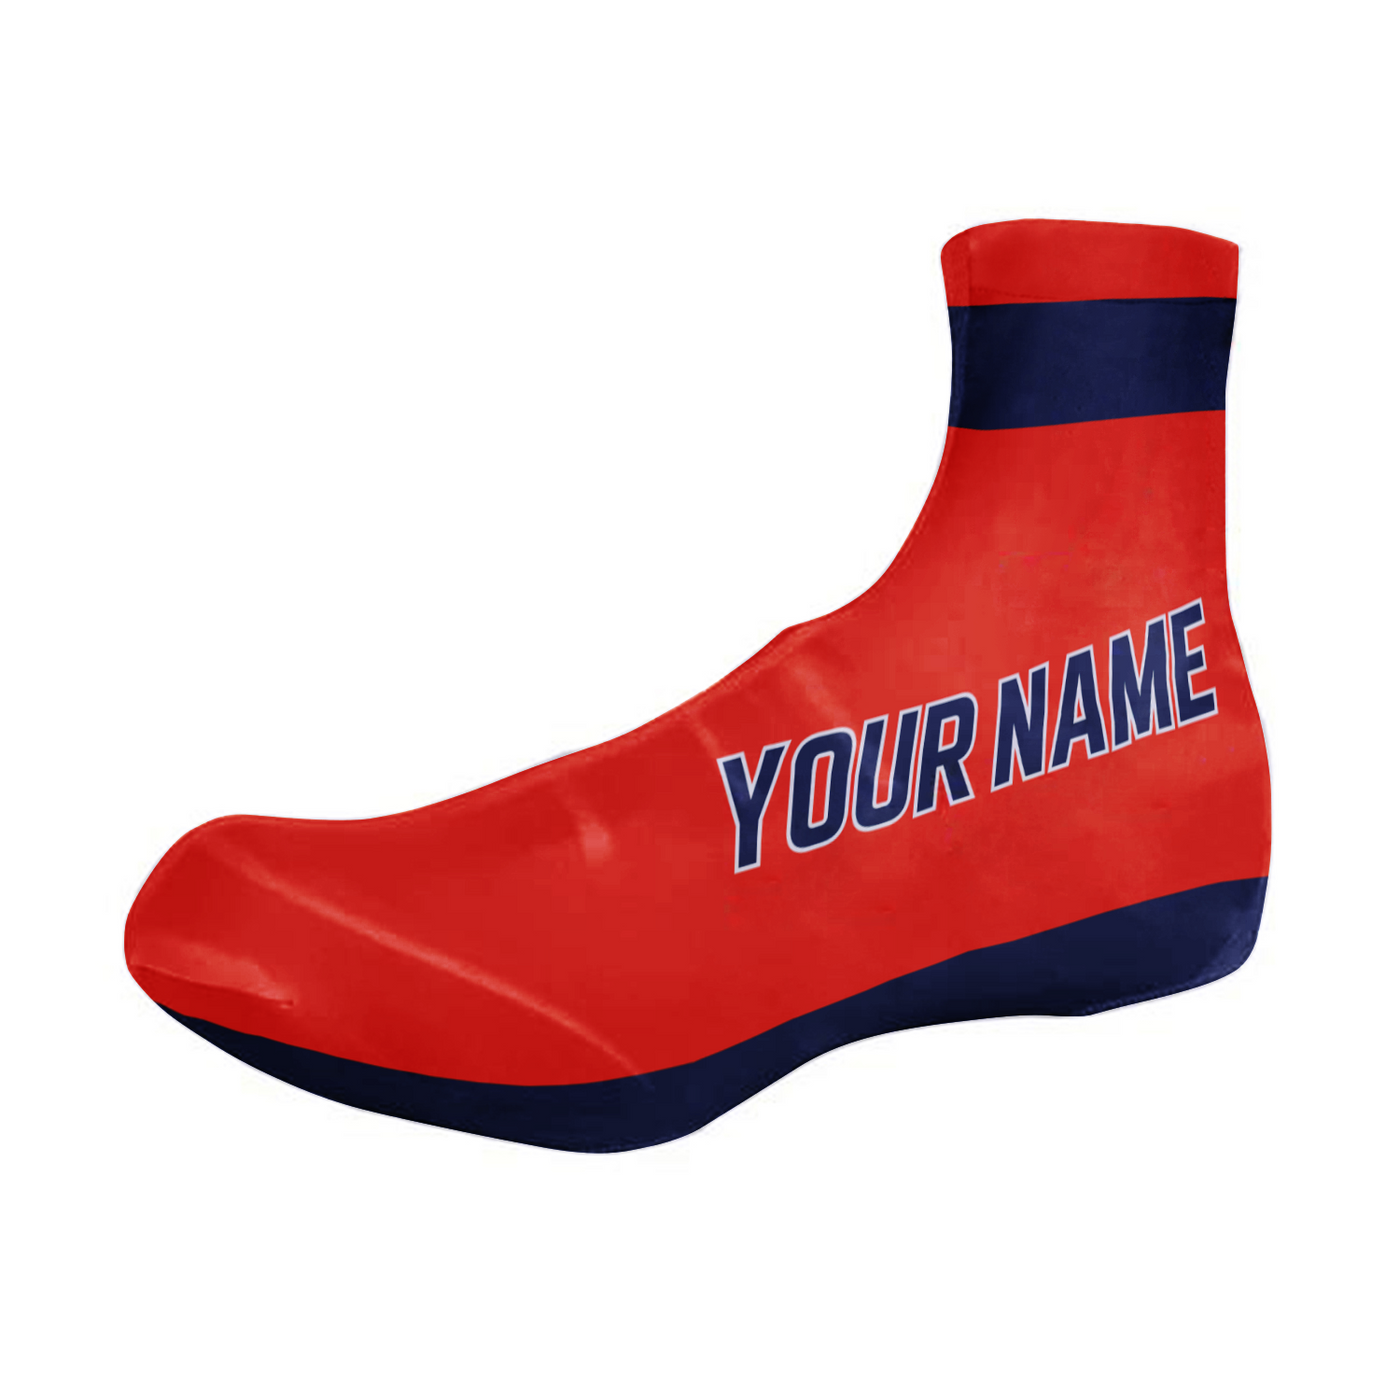 Customized Houston Cycling Shoe Covers